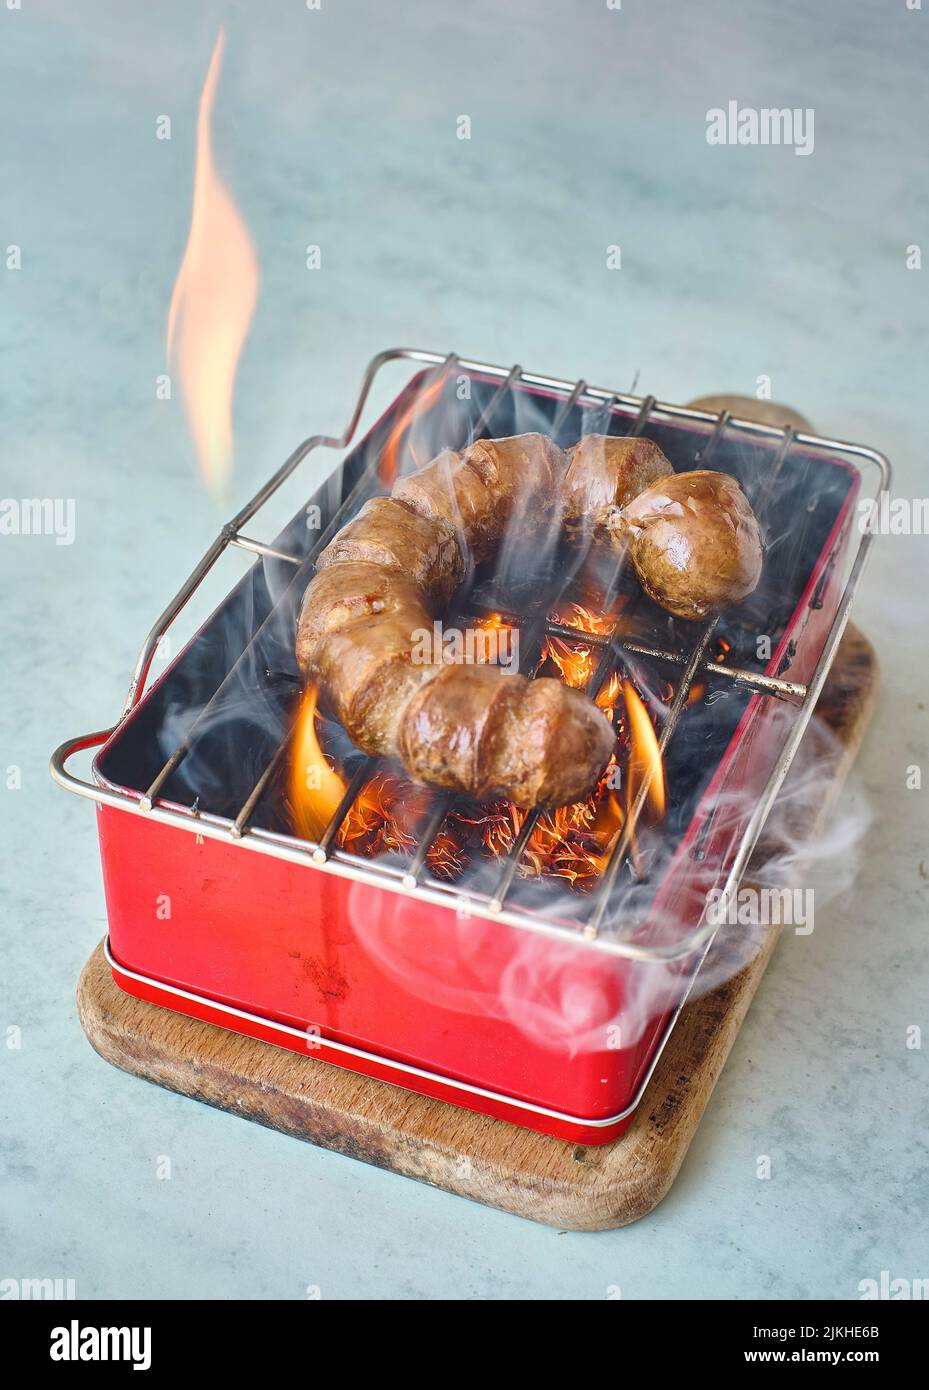 A fresh pork sausage grilling over an improvised barbecue on a metal box. Stock Photo